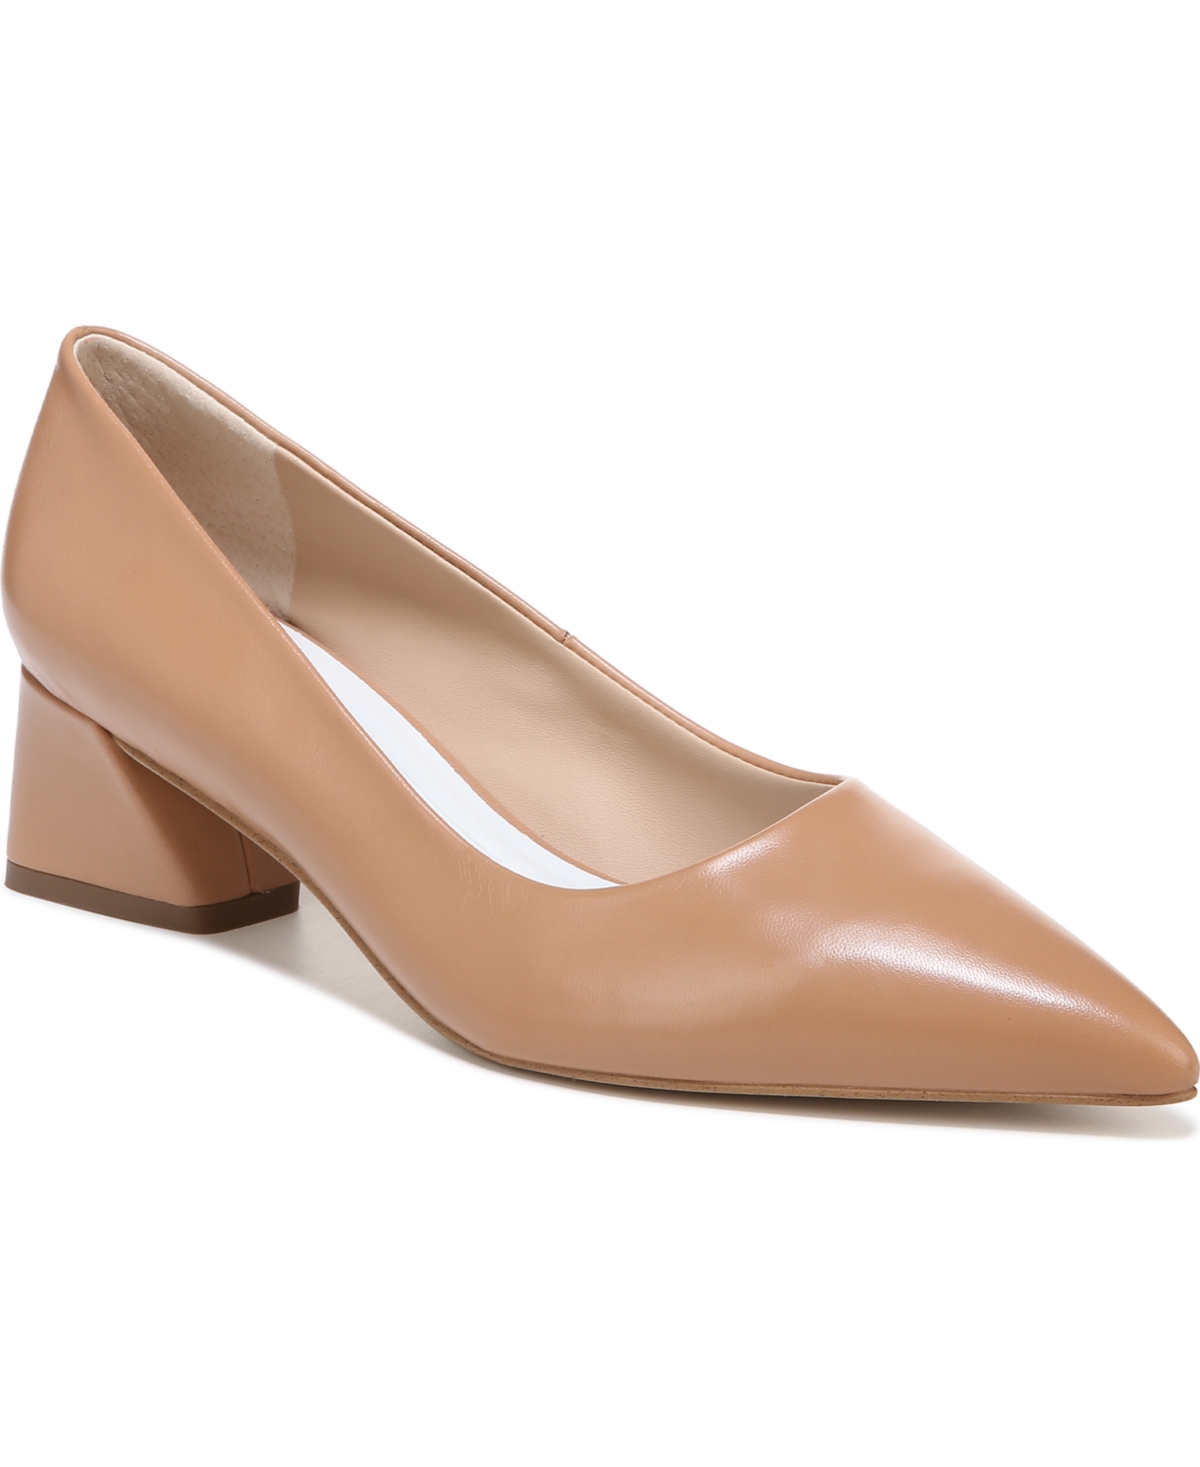 Franco Sarto Racer-pump Pumps In Toffee Tan Leather